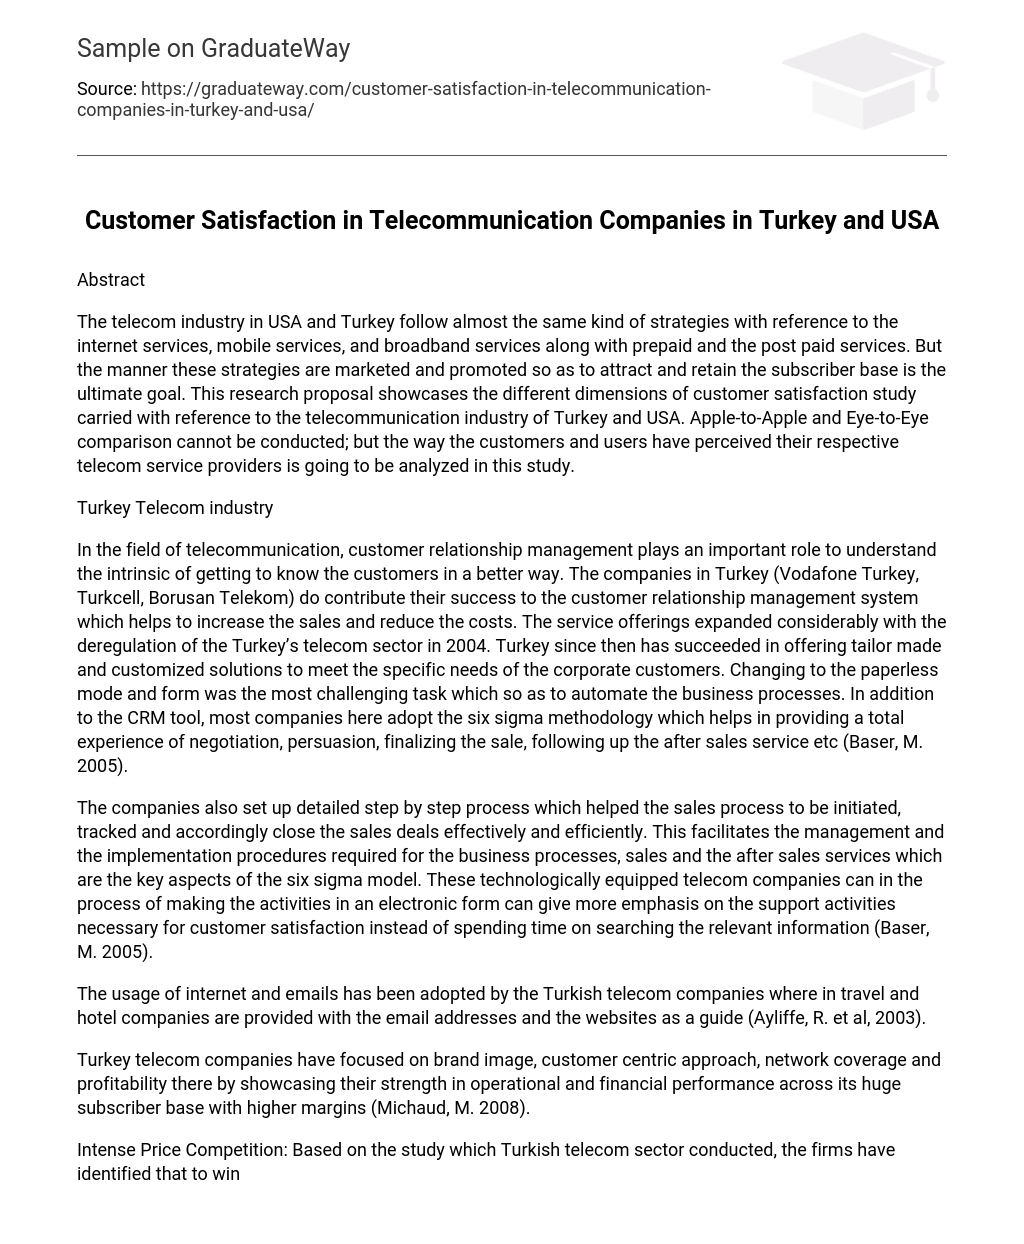 Customer Satisfaction in Telecommunication Companies in Turkey and USA